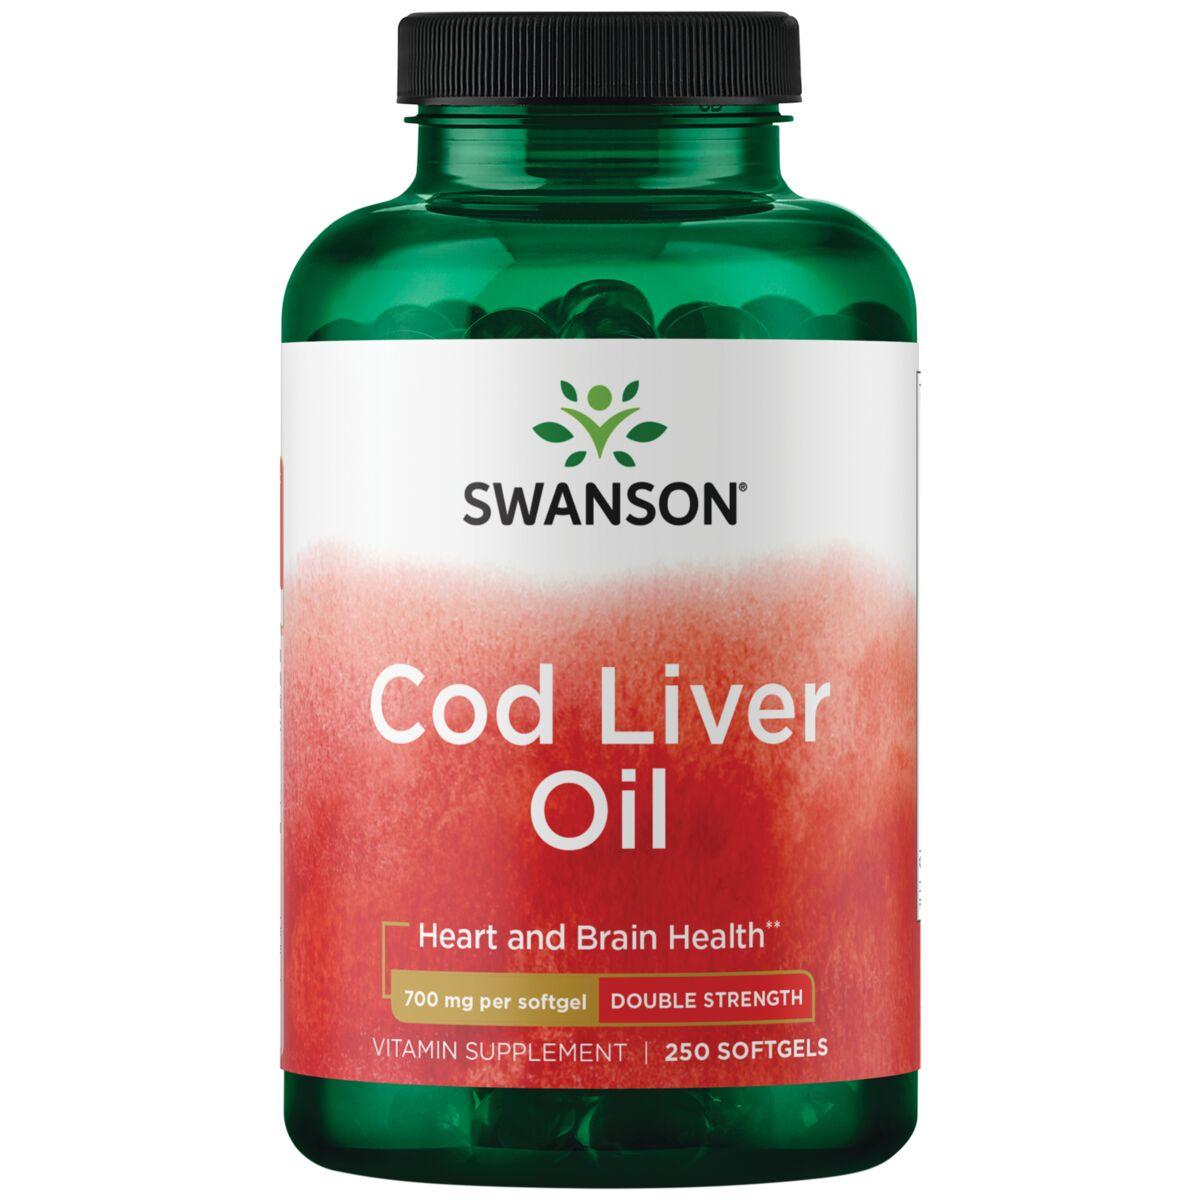 Swanson Premium Cod Liver Oil - Double Strength Supplement Vitamin 700 mg 250 Soft Gels